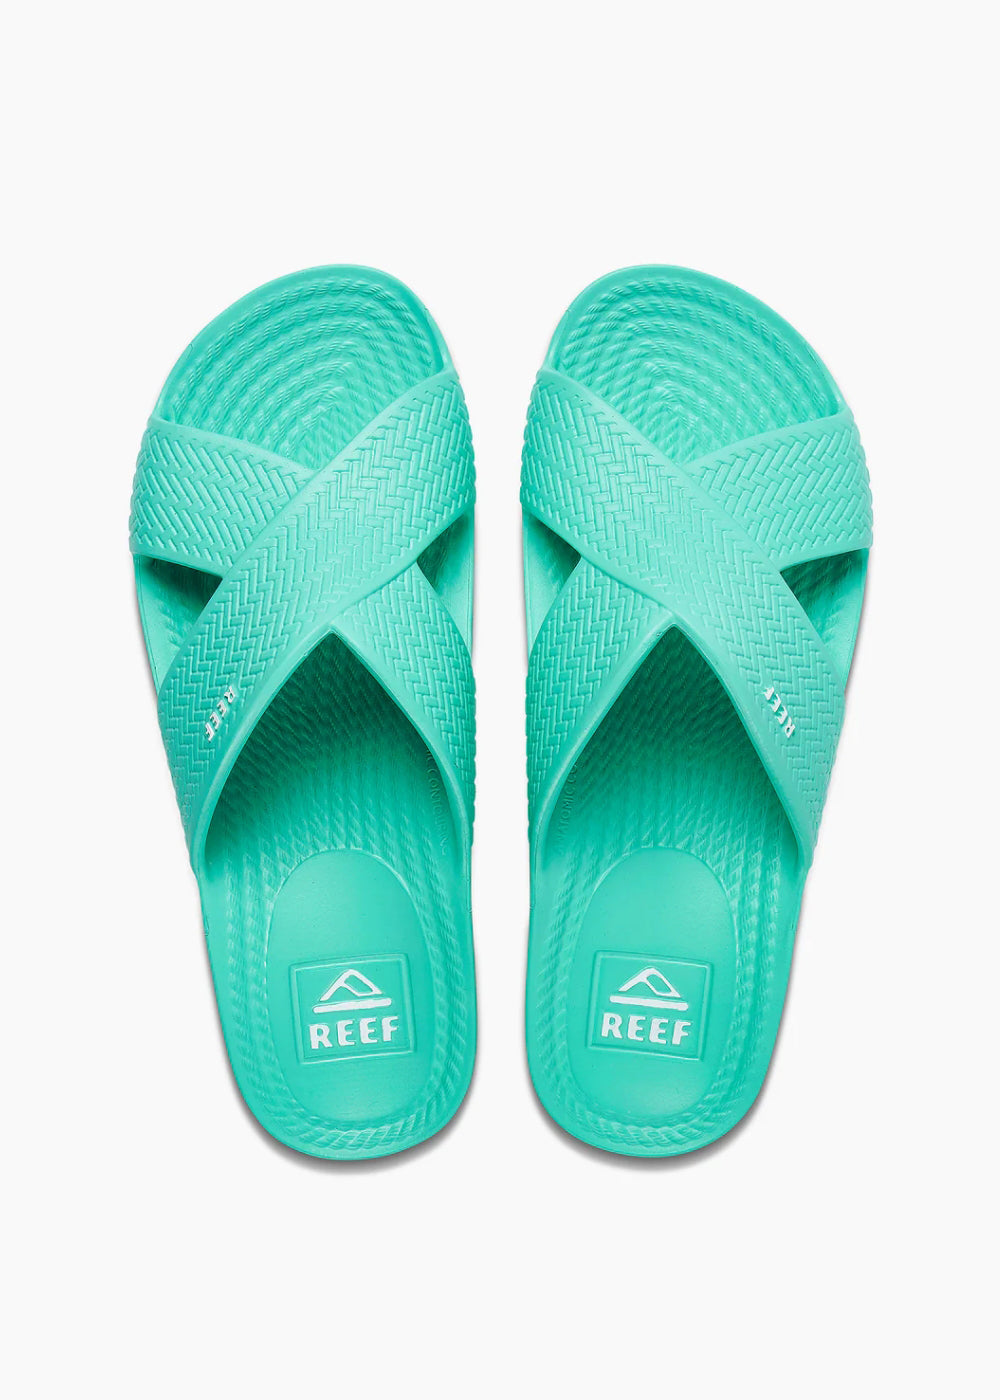 Load image into Gallery viewer, Water X Slide Sandals in Neon Teal by Reef
